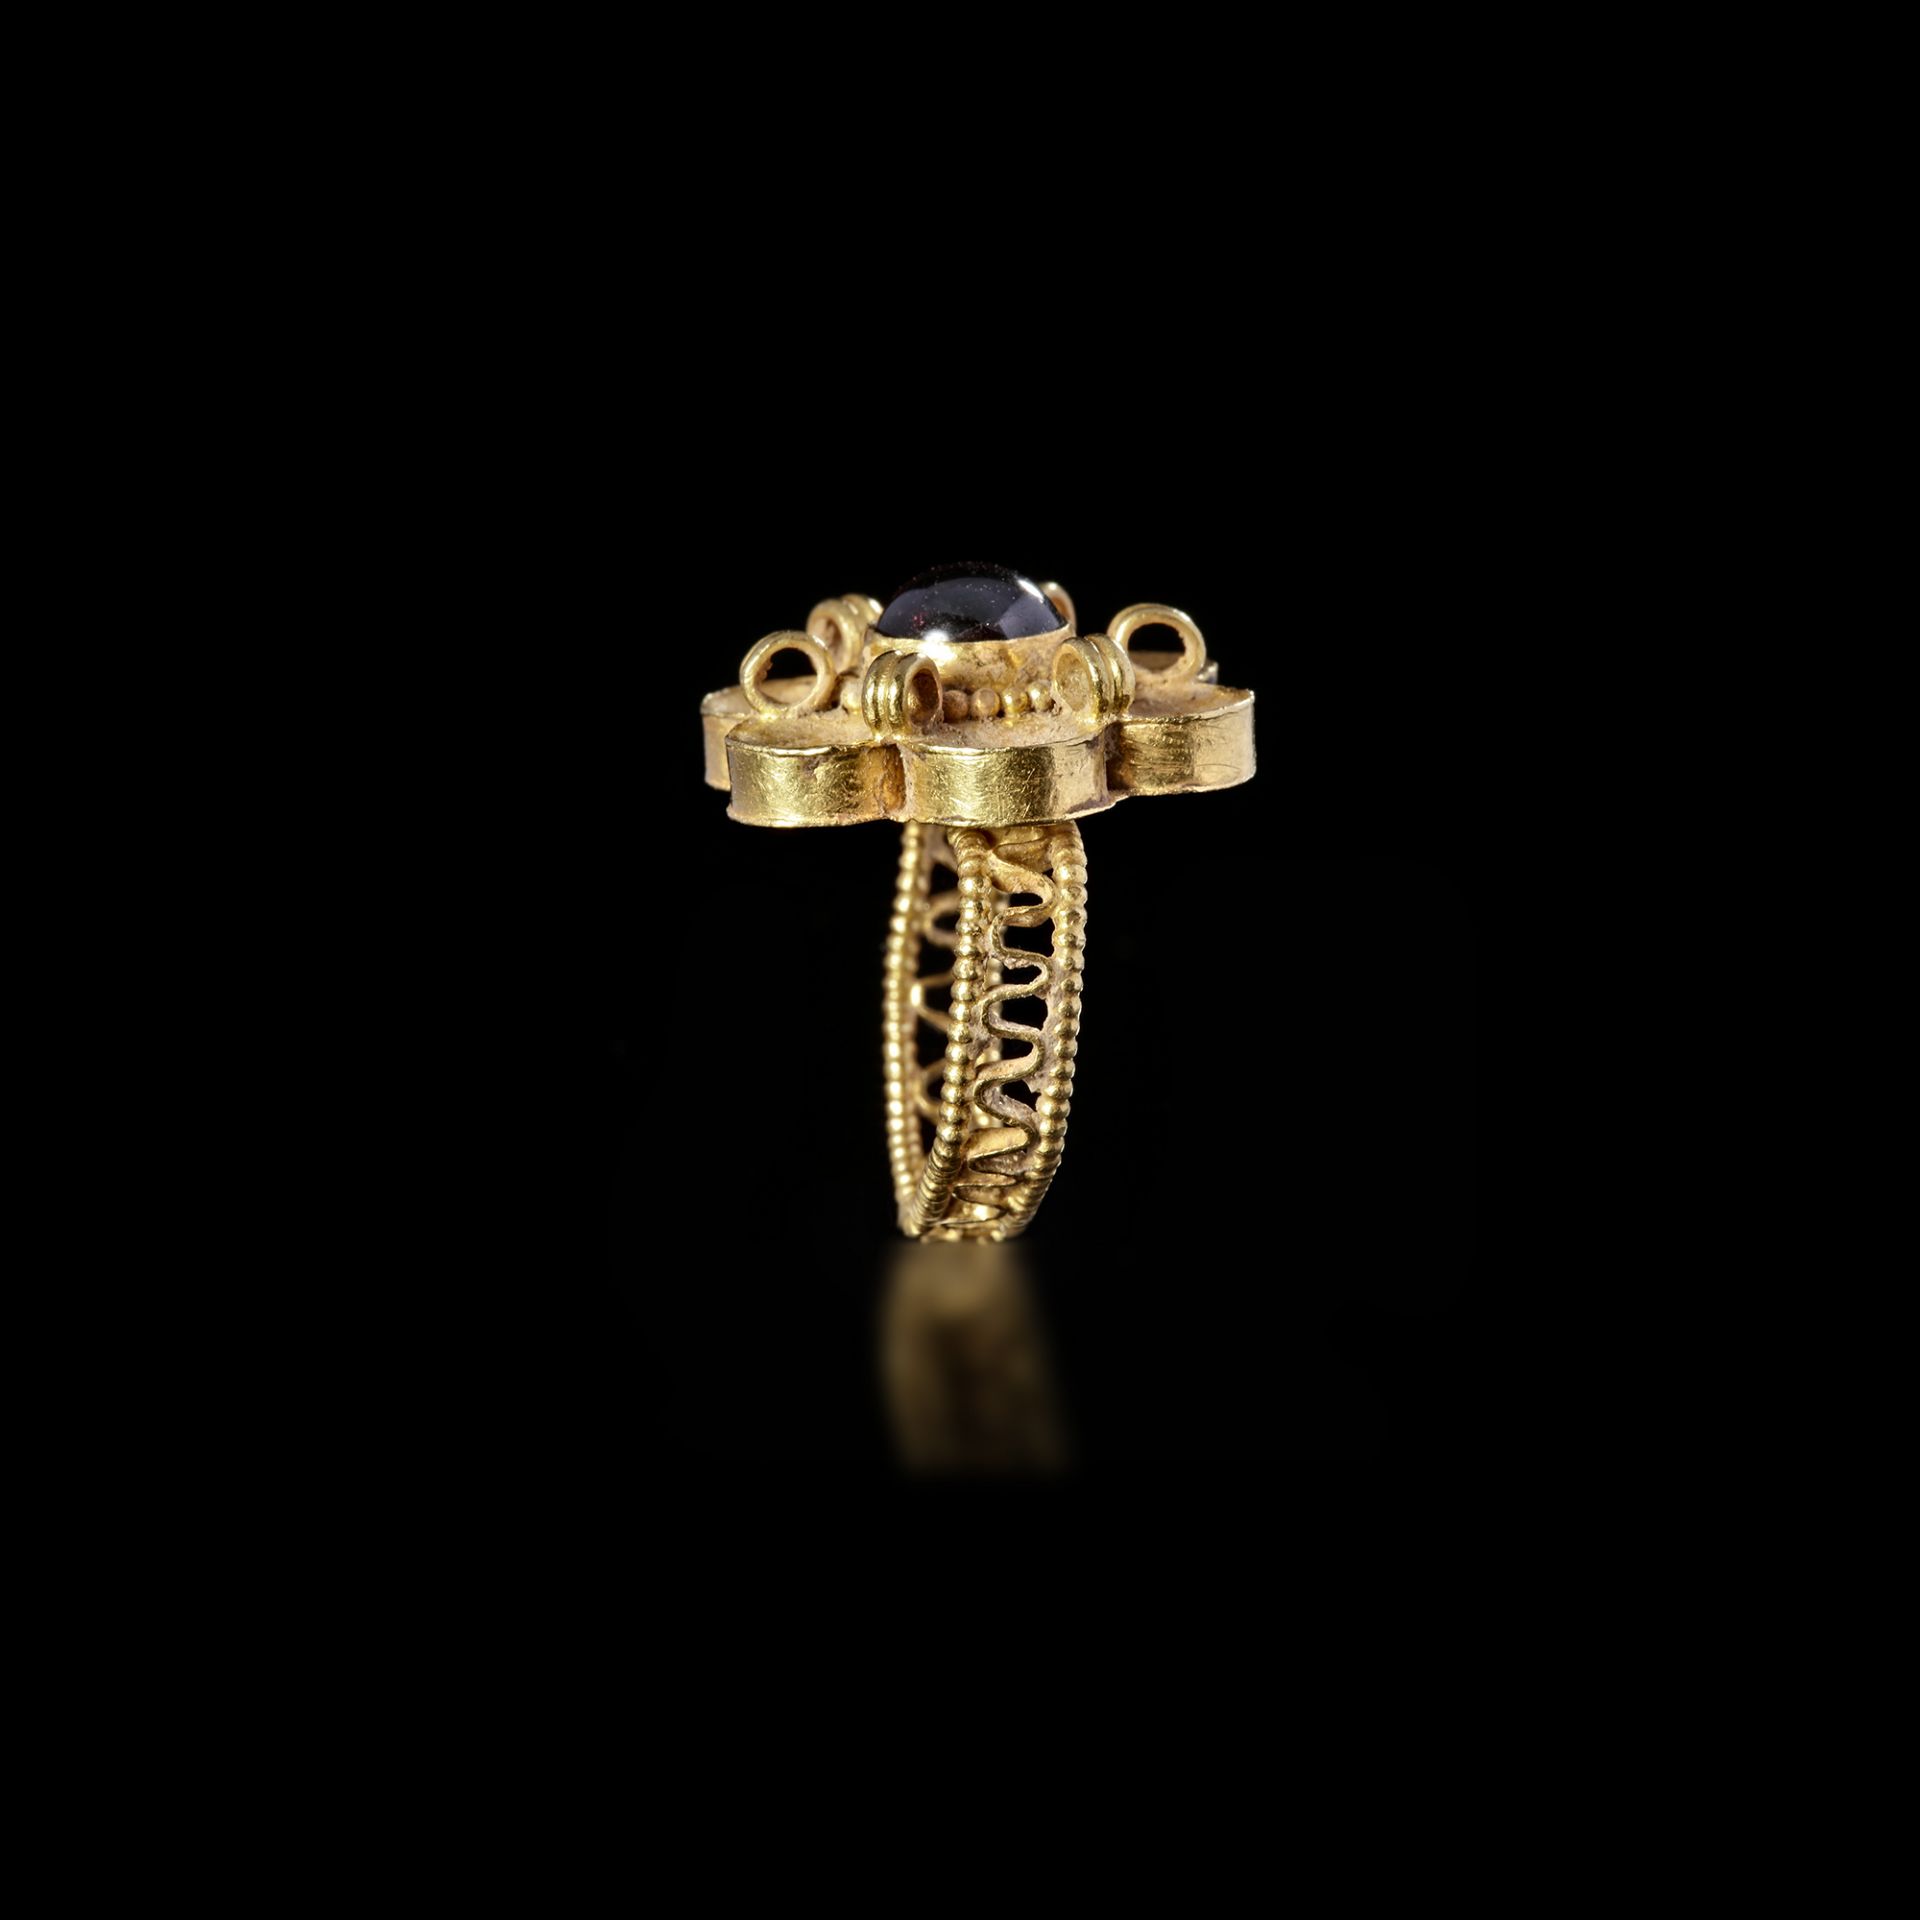 A LATE ROMAN/EARLY BYZANTINE GOLD RING WITH A GARNET, 5TH-6TH CENTURY AD - Bild 4 aus 4